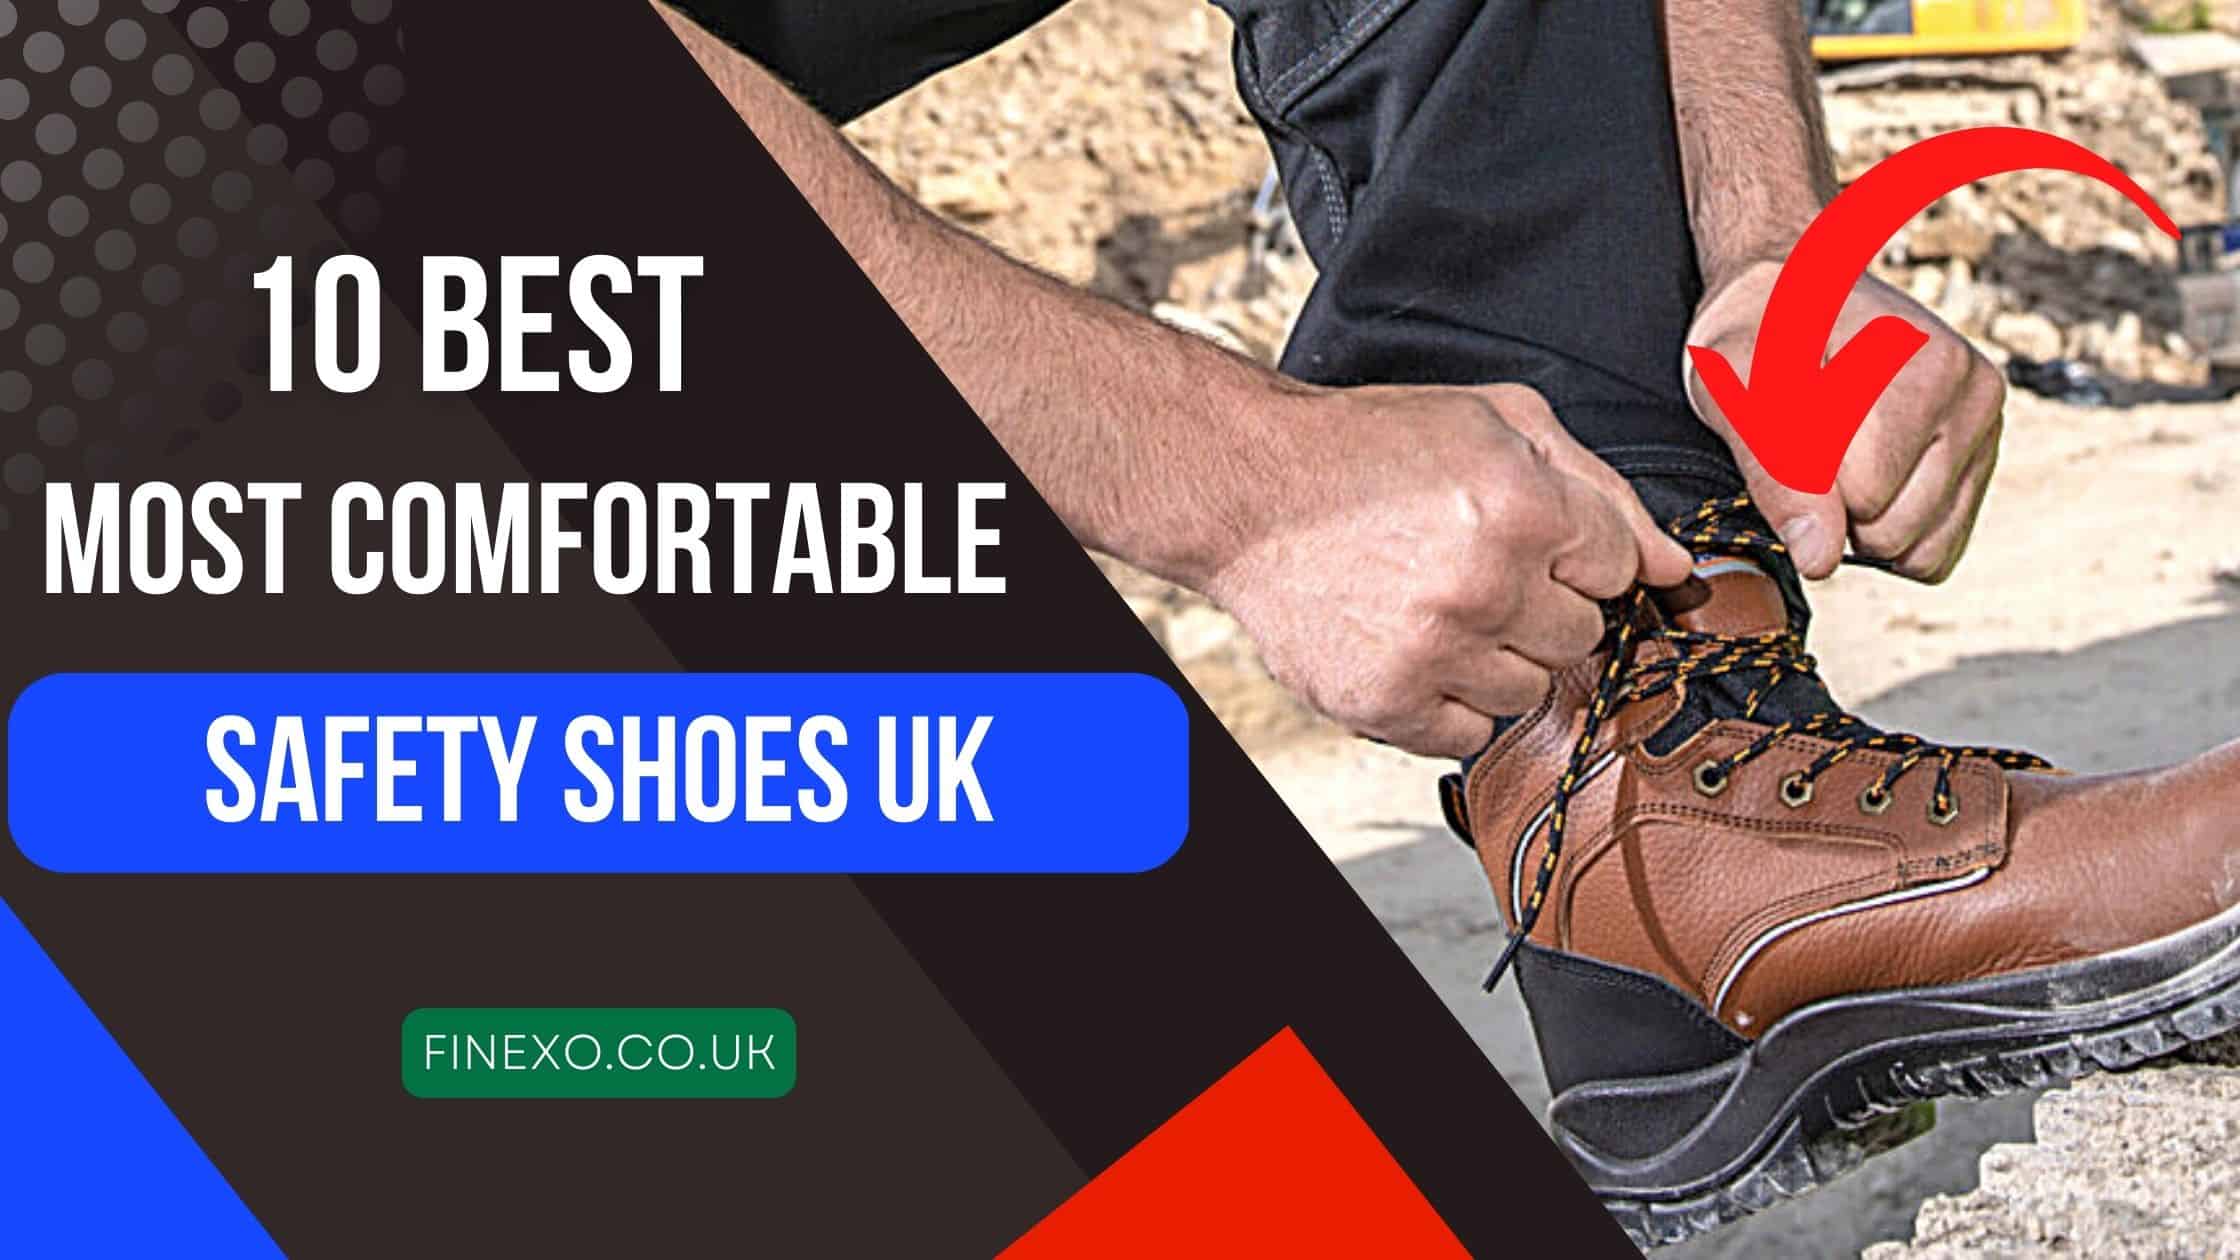 Top 10 Most Comfortable Safety Shoes UK